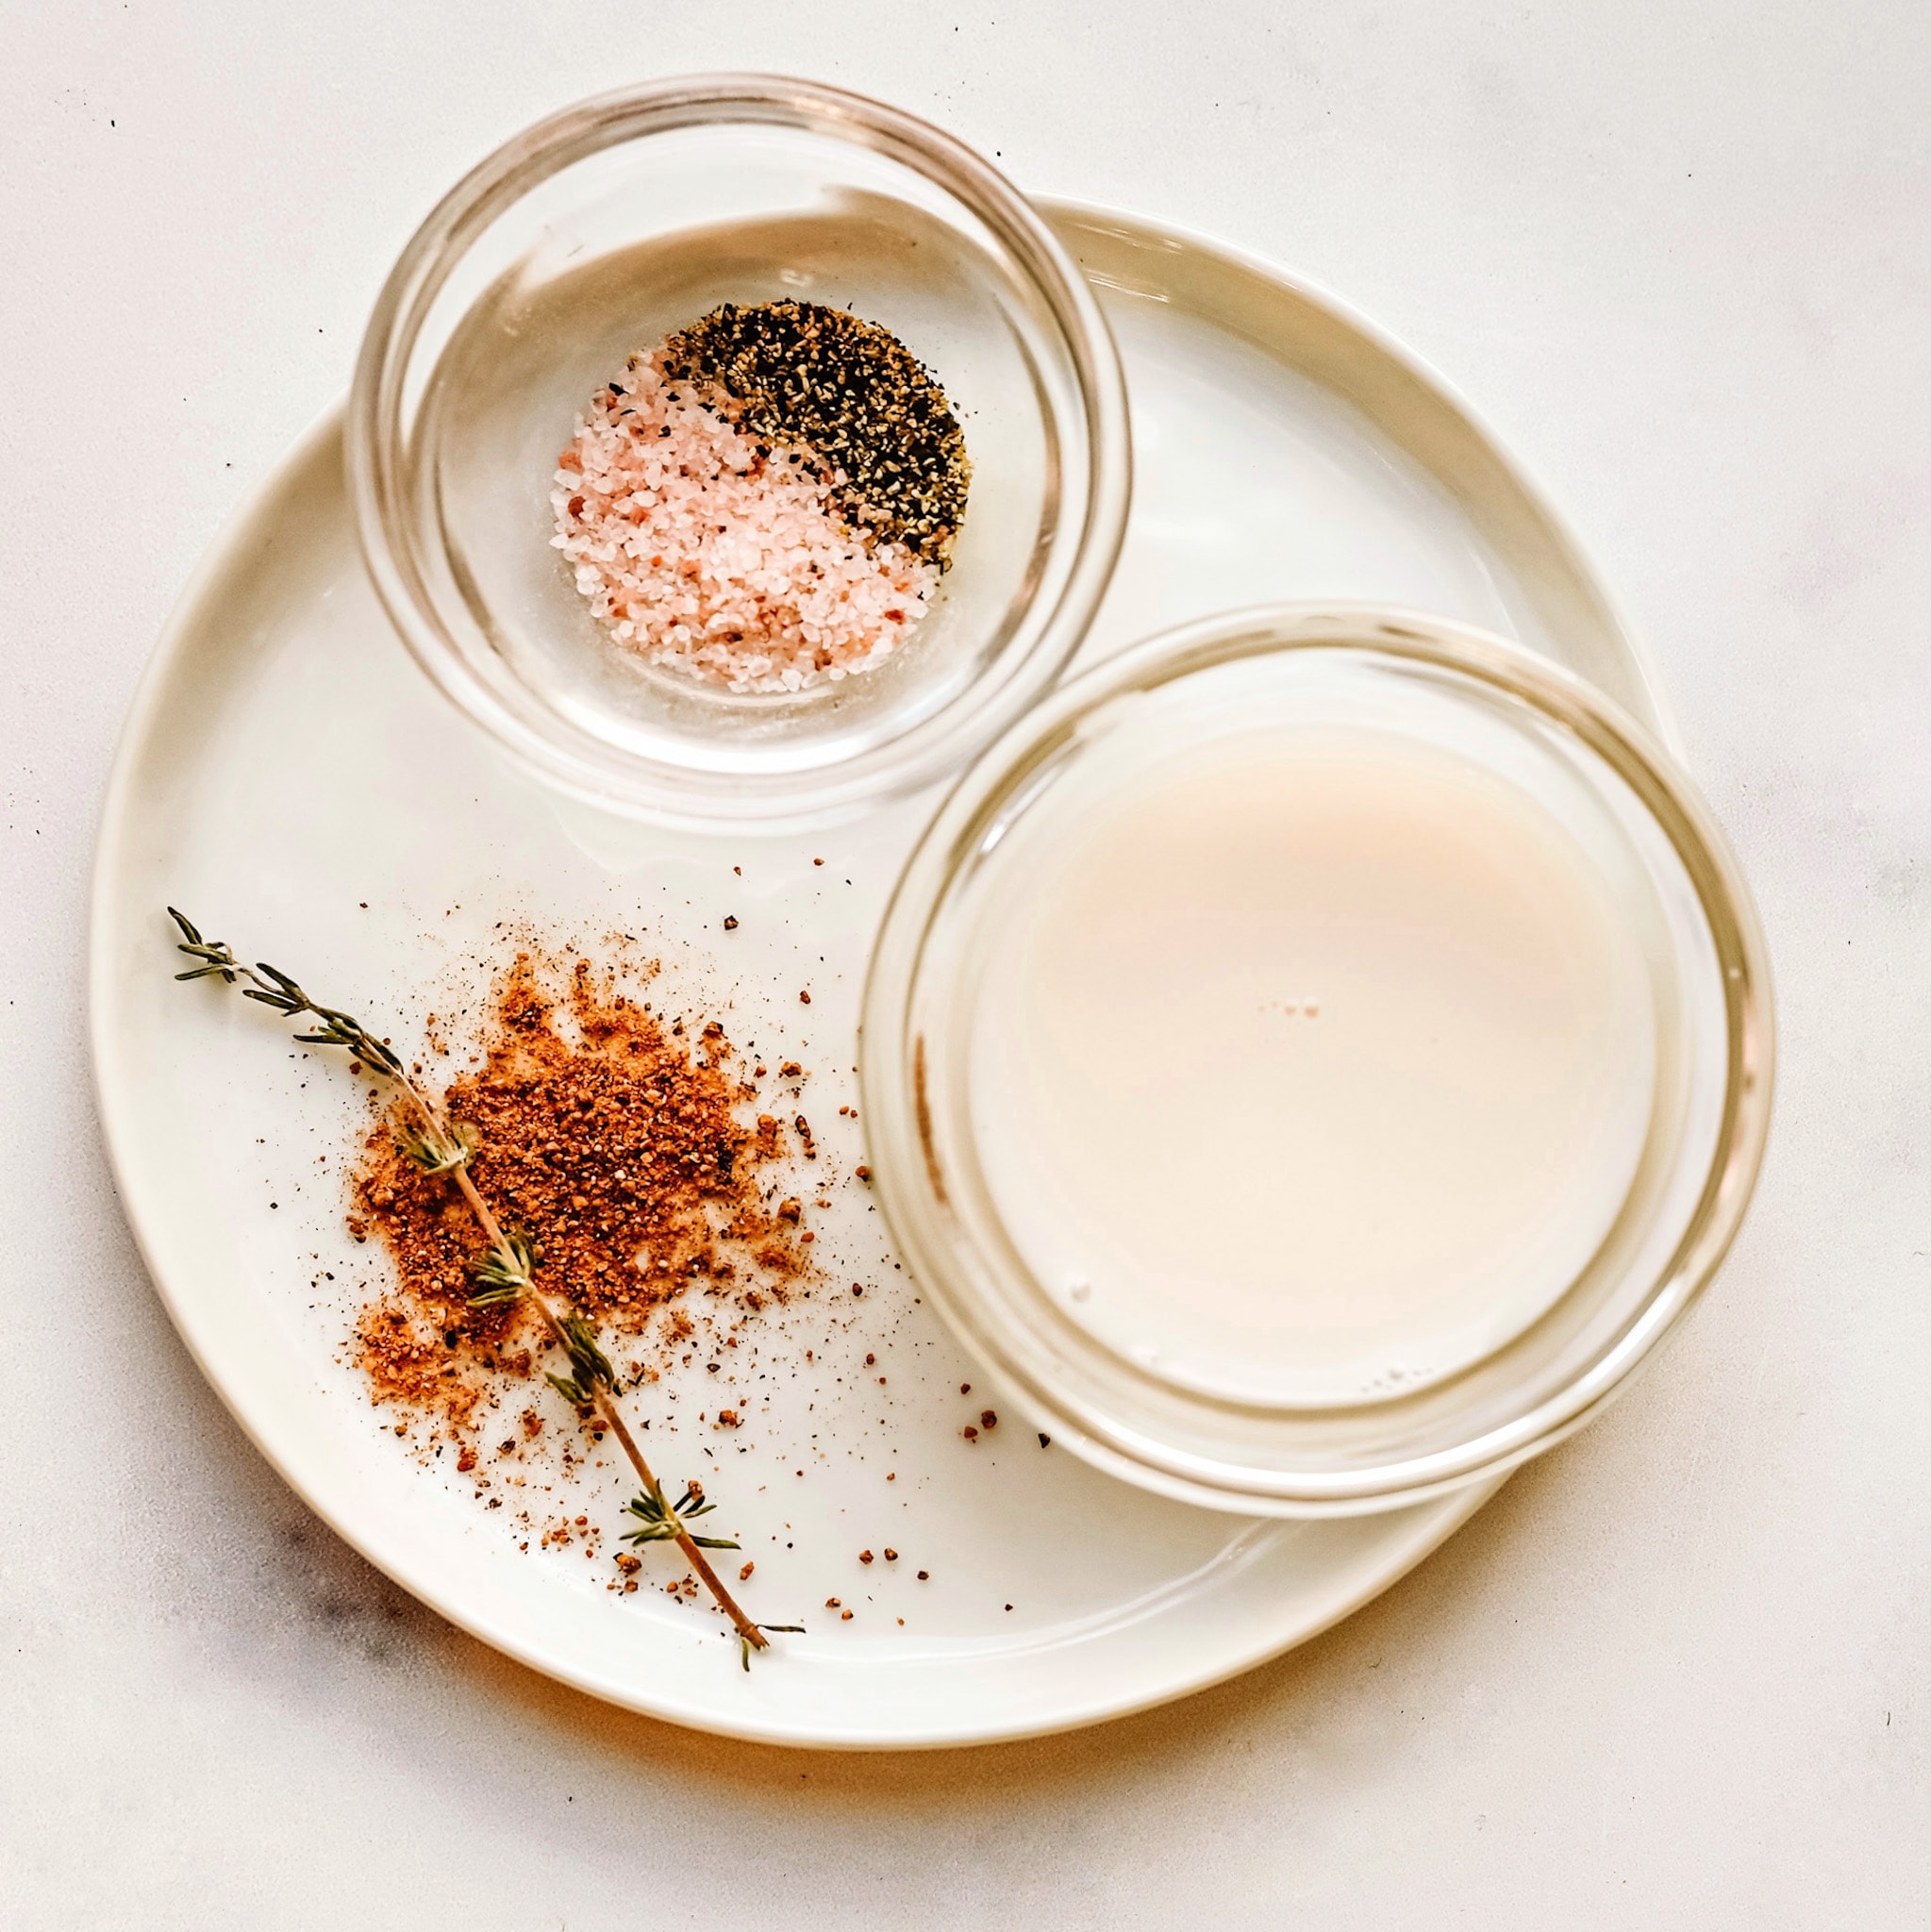 An ingredient seasoning shot, with a small bowl of salt and pepper, coconut milk, and fresh herbs.